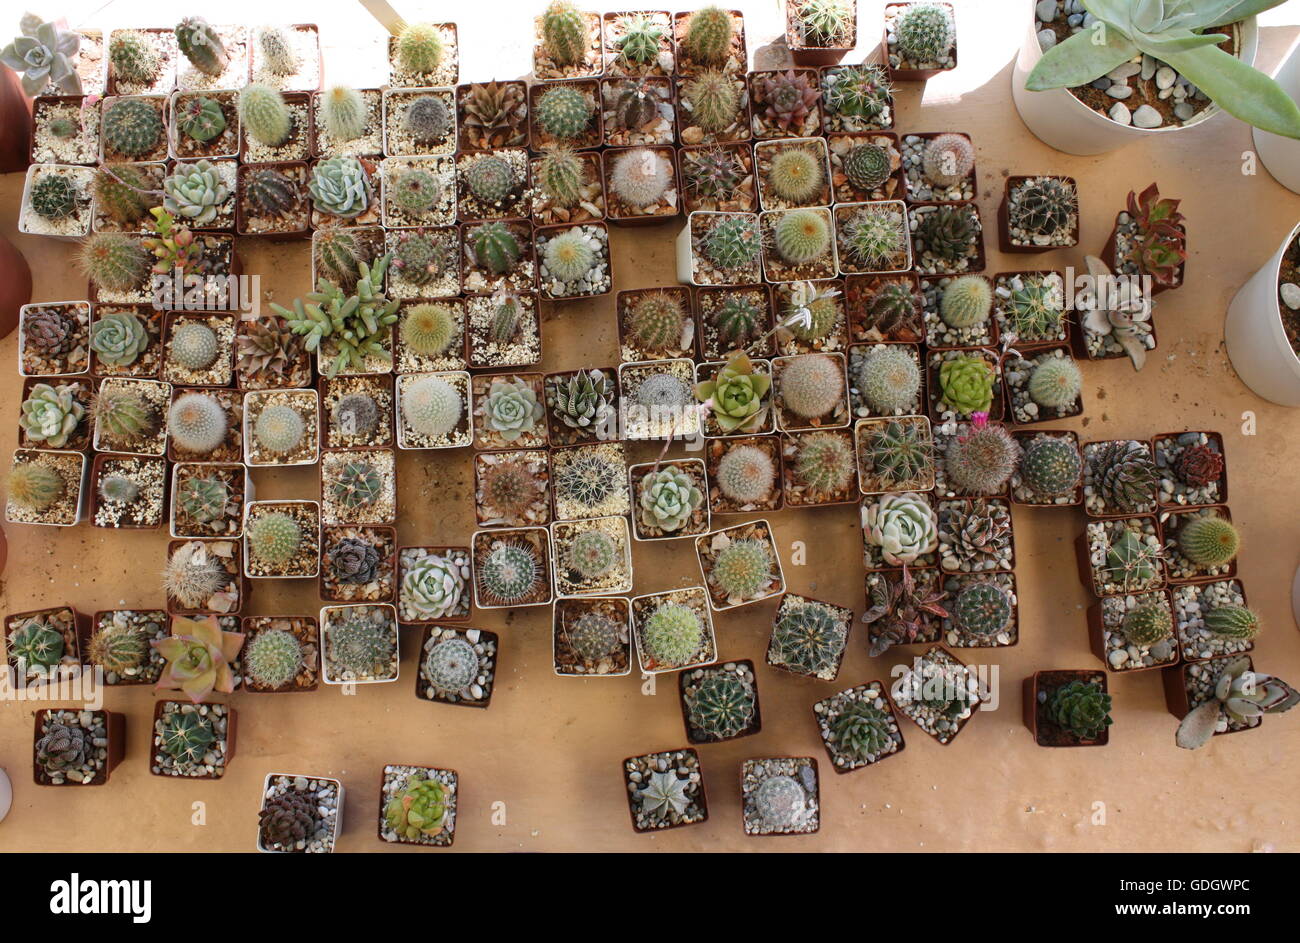 cactus and succulent collection Stock Photo